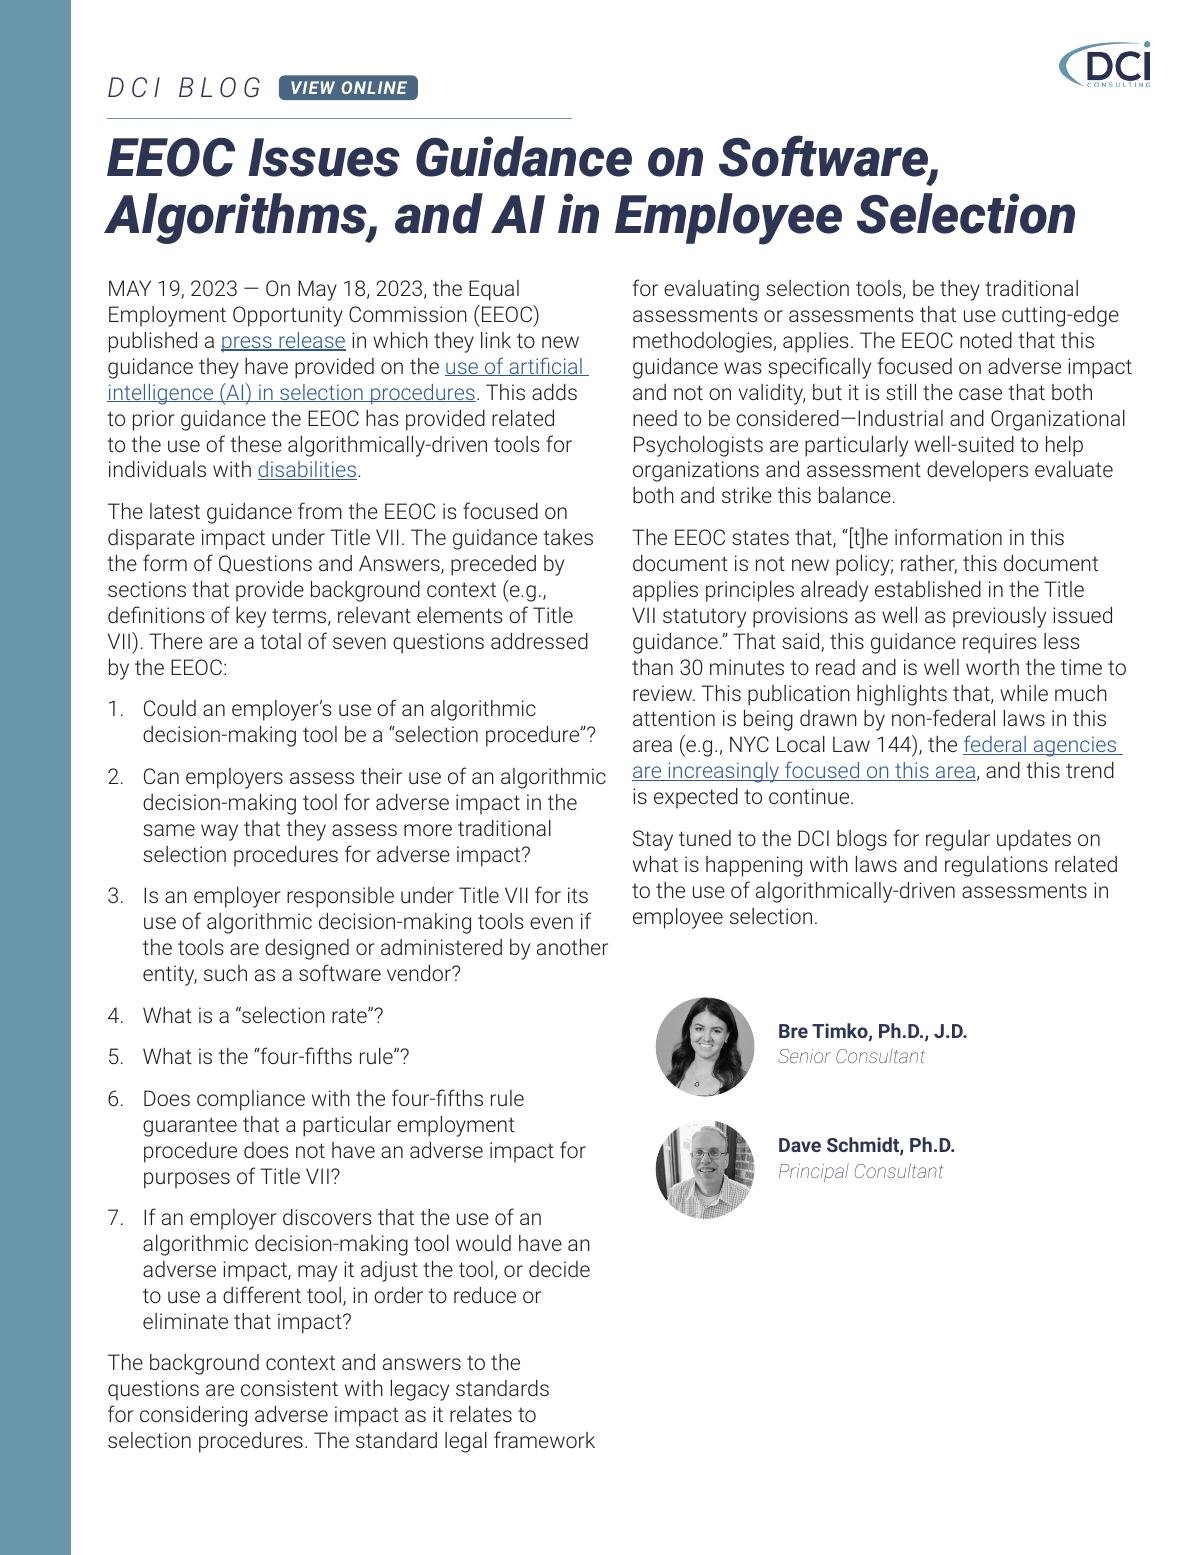 EEOC Issues Guidance on Software, Algorithms, and AI in Employee Selection